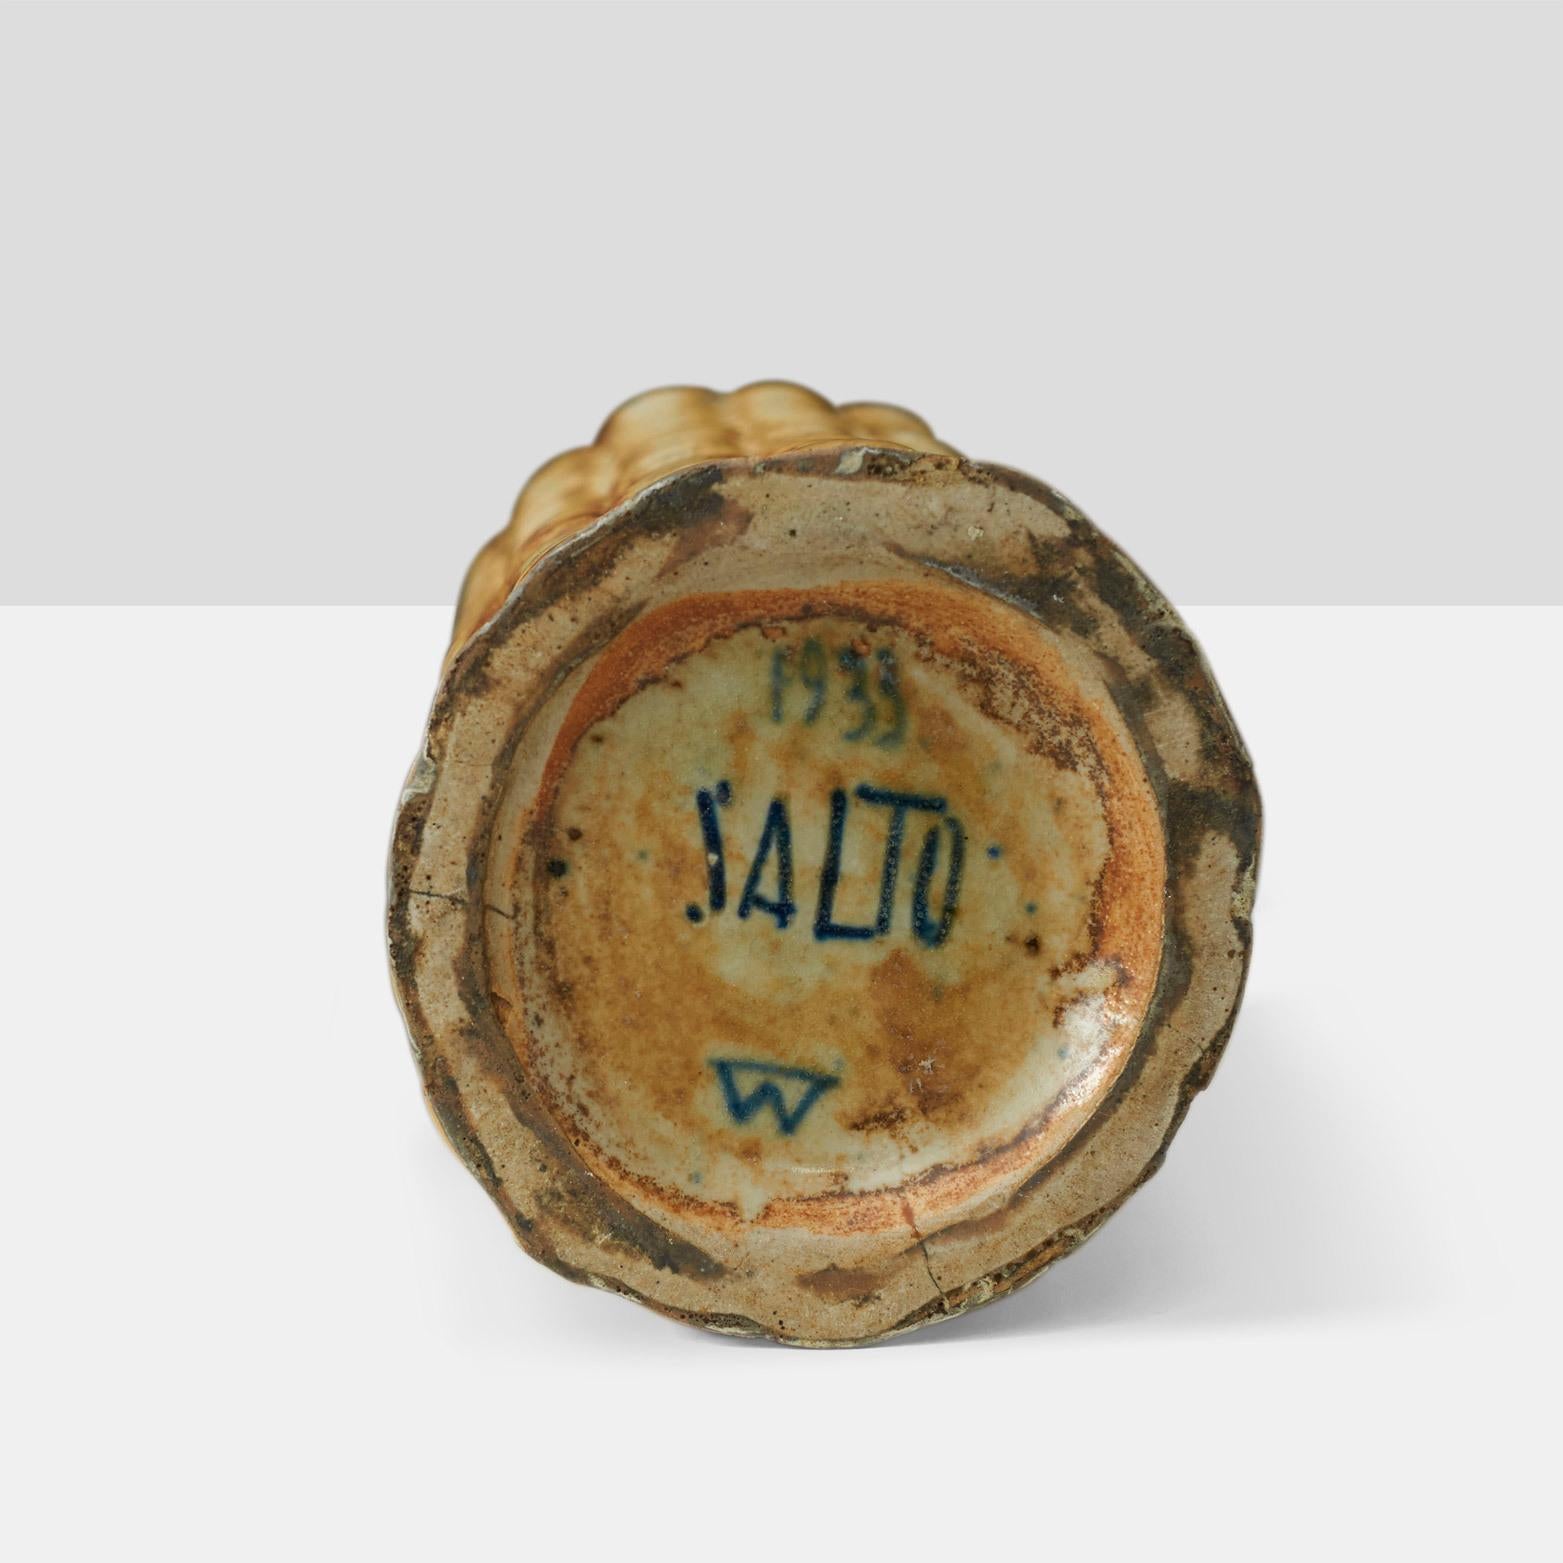 An Iconic Salto bud vase form in Sung glaze, incised with three line wave mark (Salto 20564) with stamped manufacturer’s mark to underside: [Royal Copenhagen Denmark 1933] and the signature of the designer.